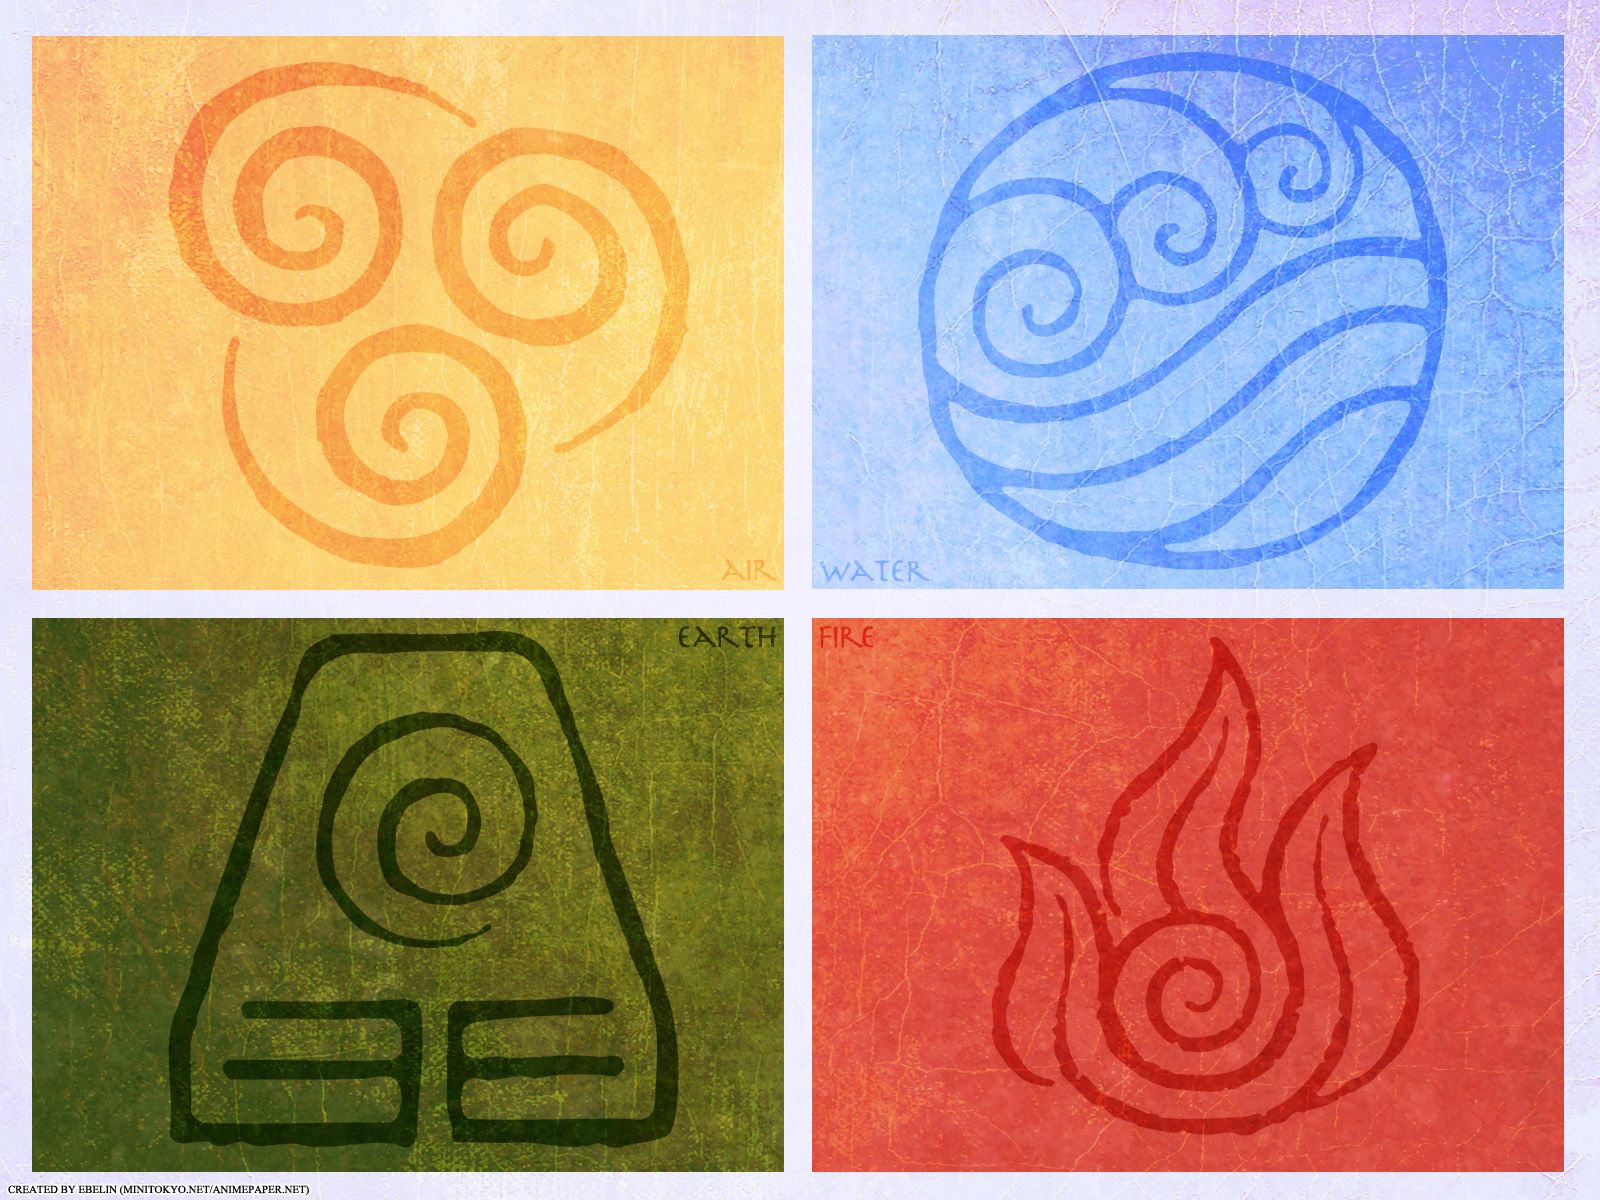 Avatar: The Last Airbender Wallpaper: Four nations